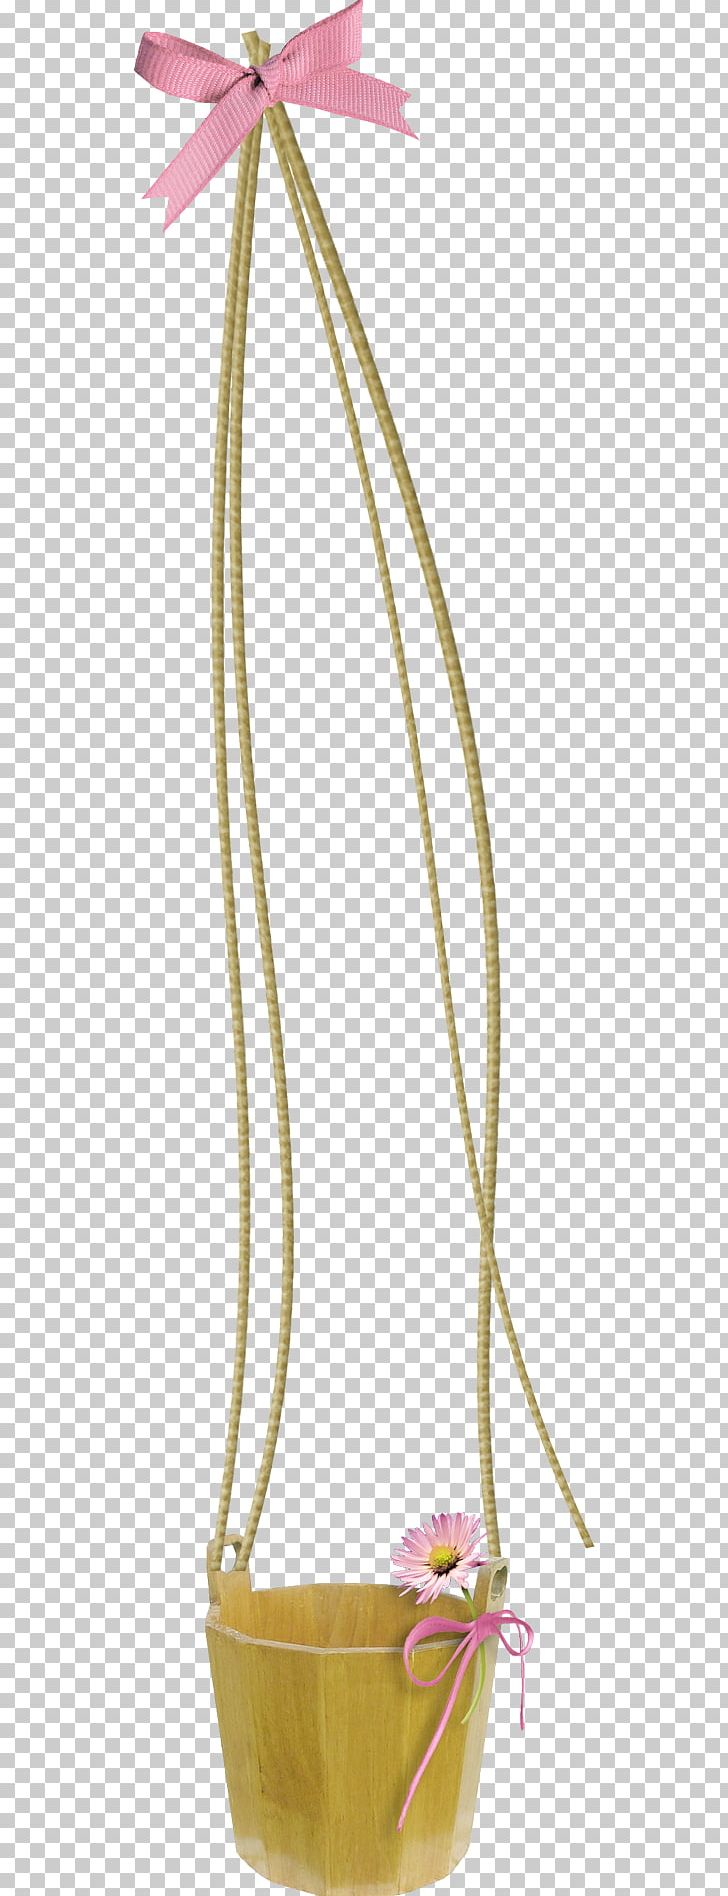 Rope Computer File PNG, Clipart, Bow, Bows, Bow Tie, Bucket, Computer File Free PNG Download